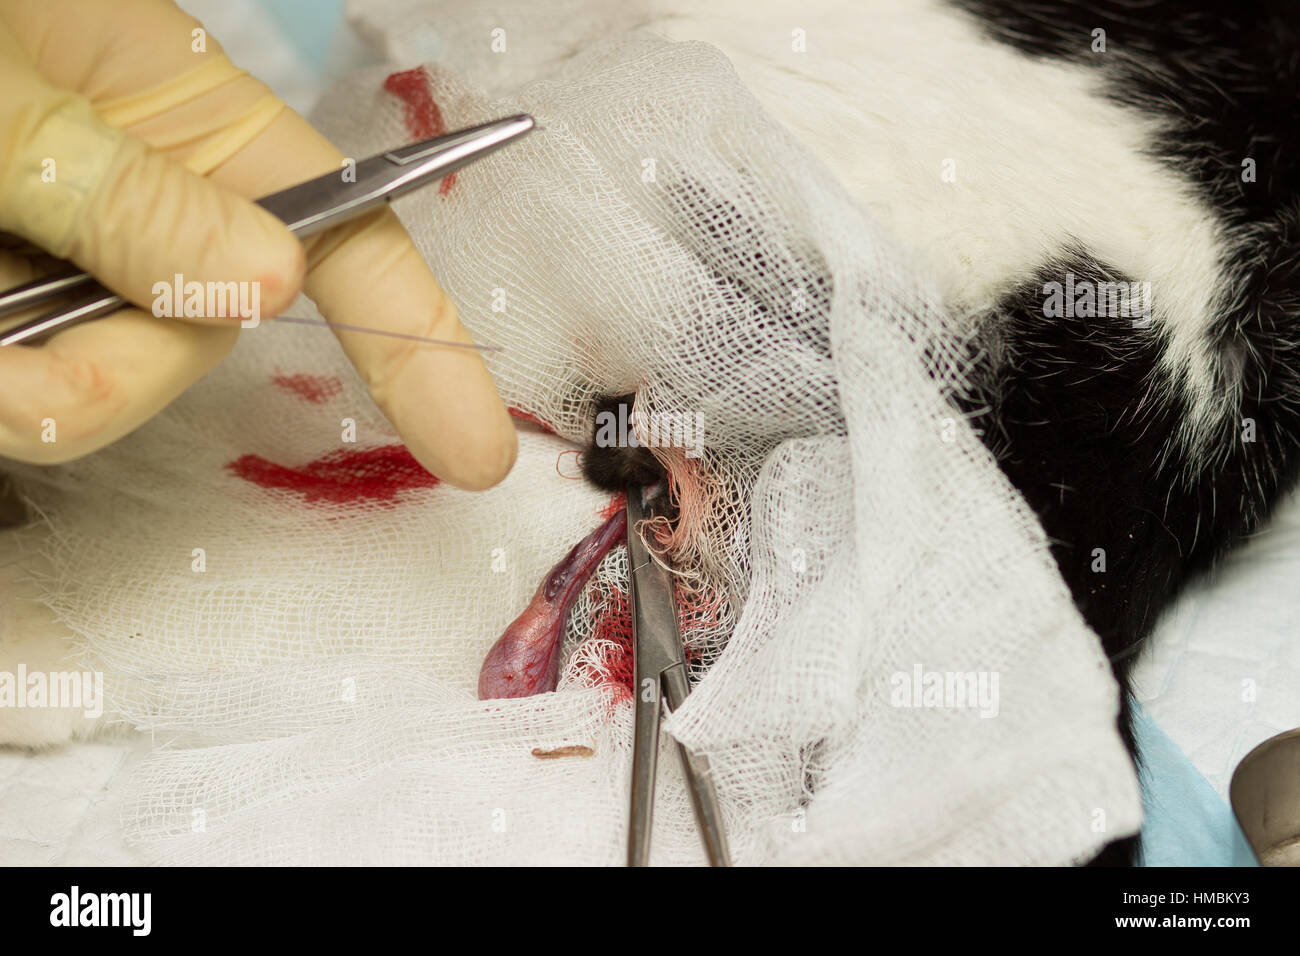 Cat Castration. The eggs, bandage, clamp, thread, gloves, fingers, blood vessels, vas deferens, the needle, the blood Stock Photo